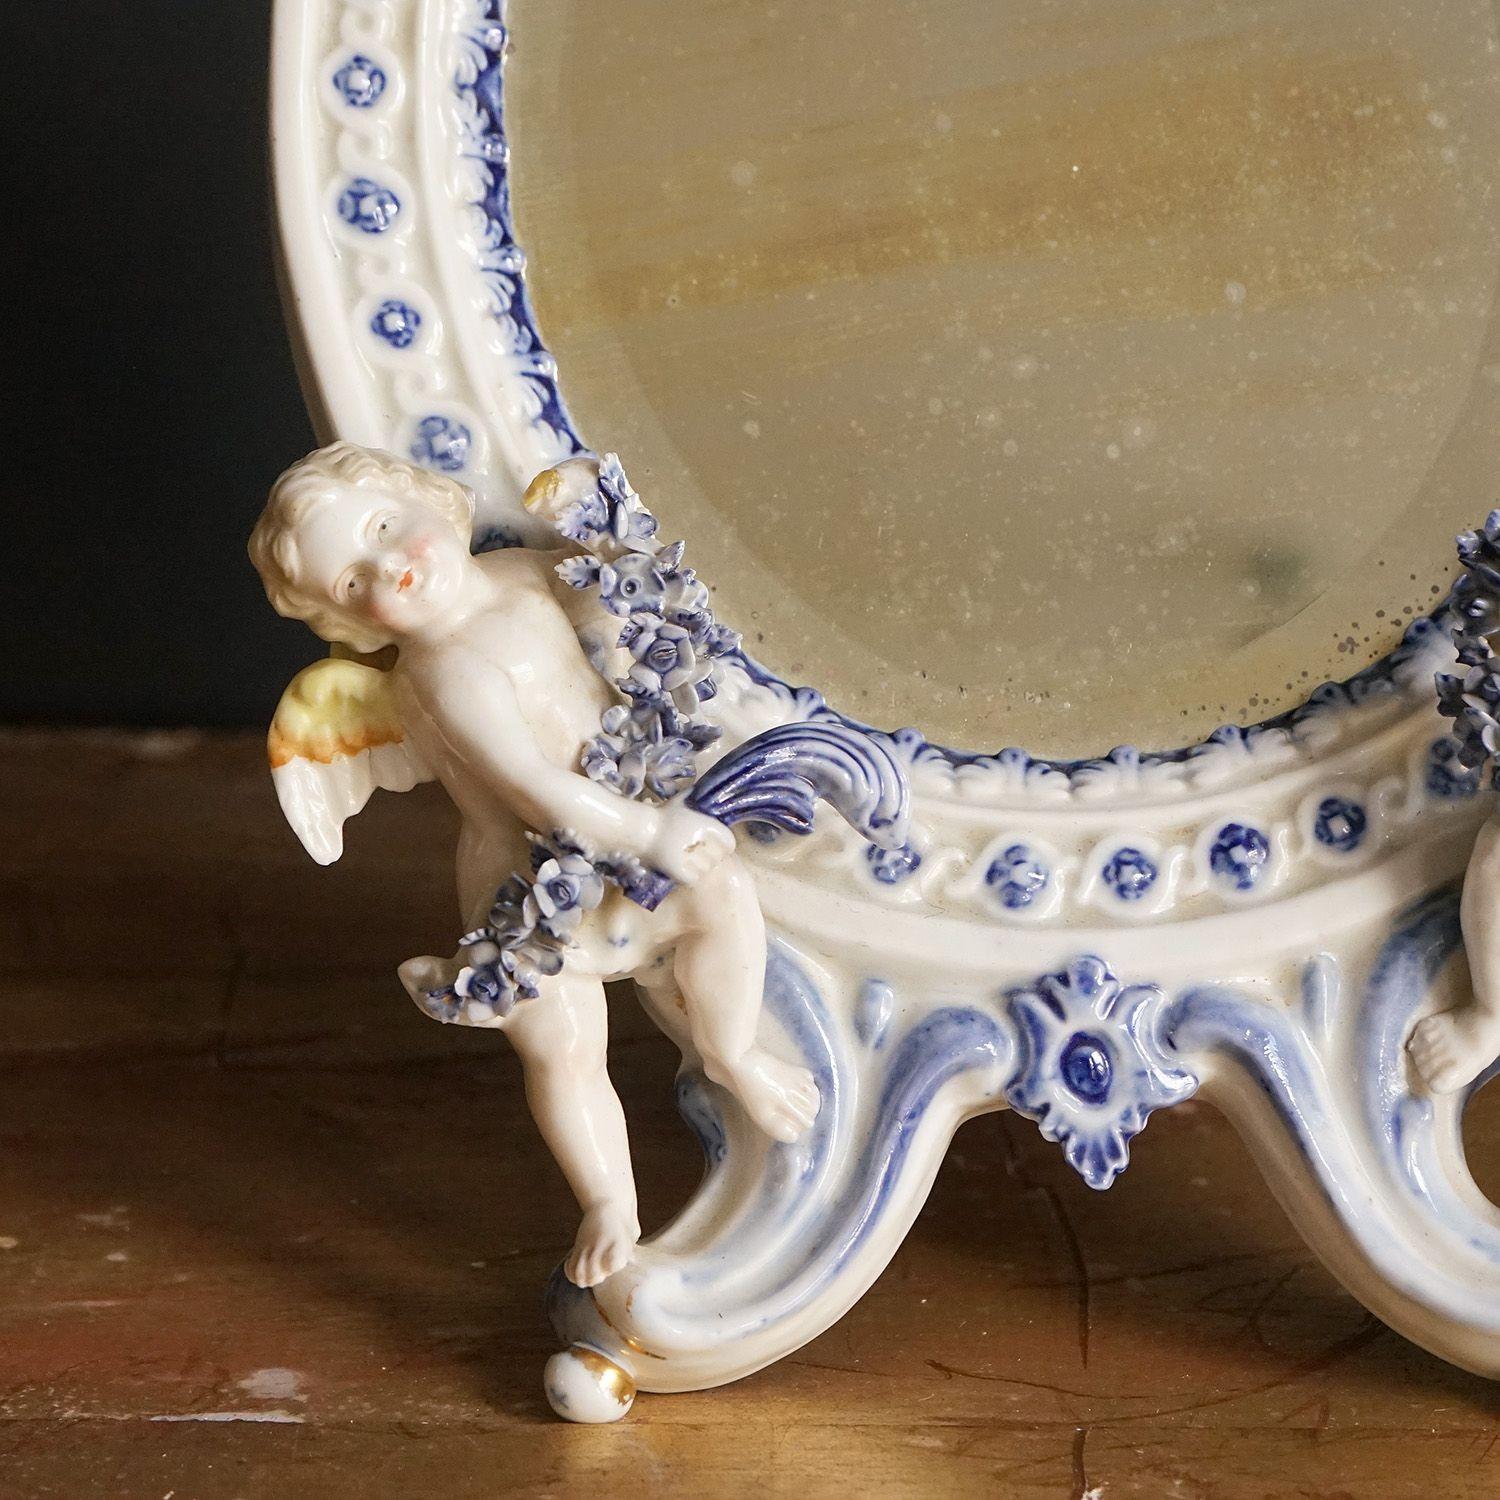 Ceramic Antique German Porcelain Table Mirror With Cherubs, 19th Century For Sale